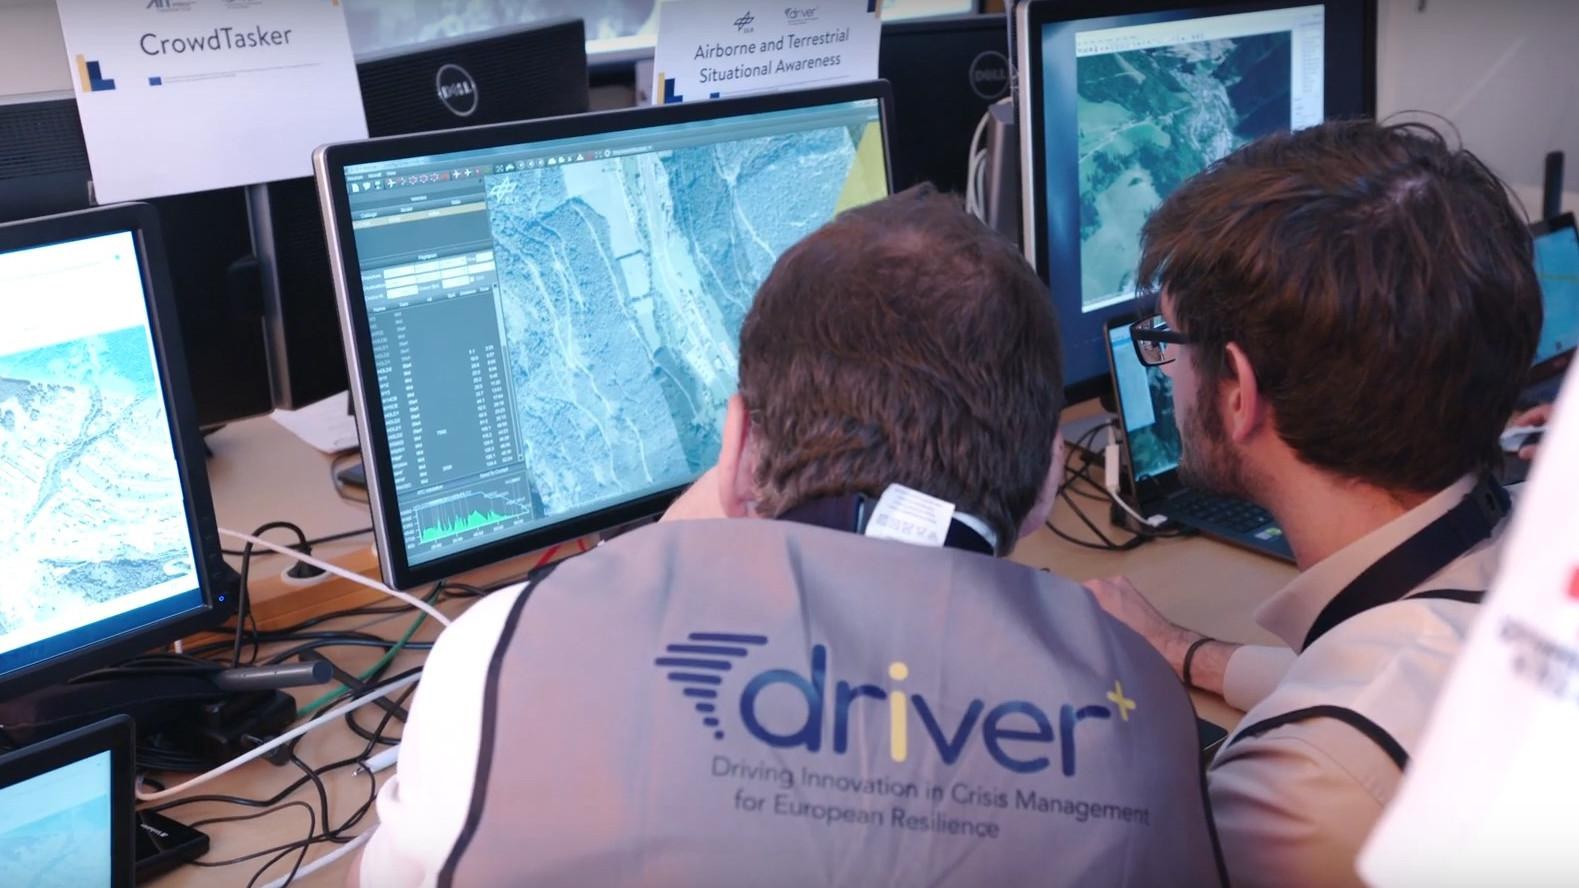 DRIVER - Driving Innovation in Crisis Management for European Resilience